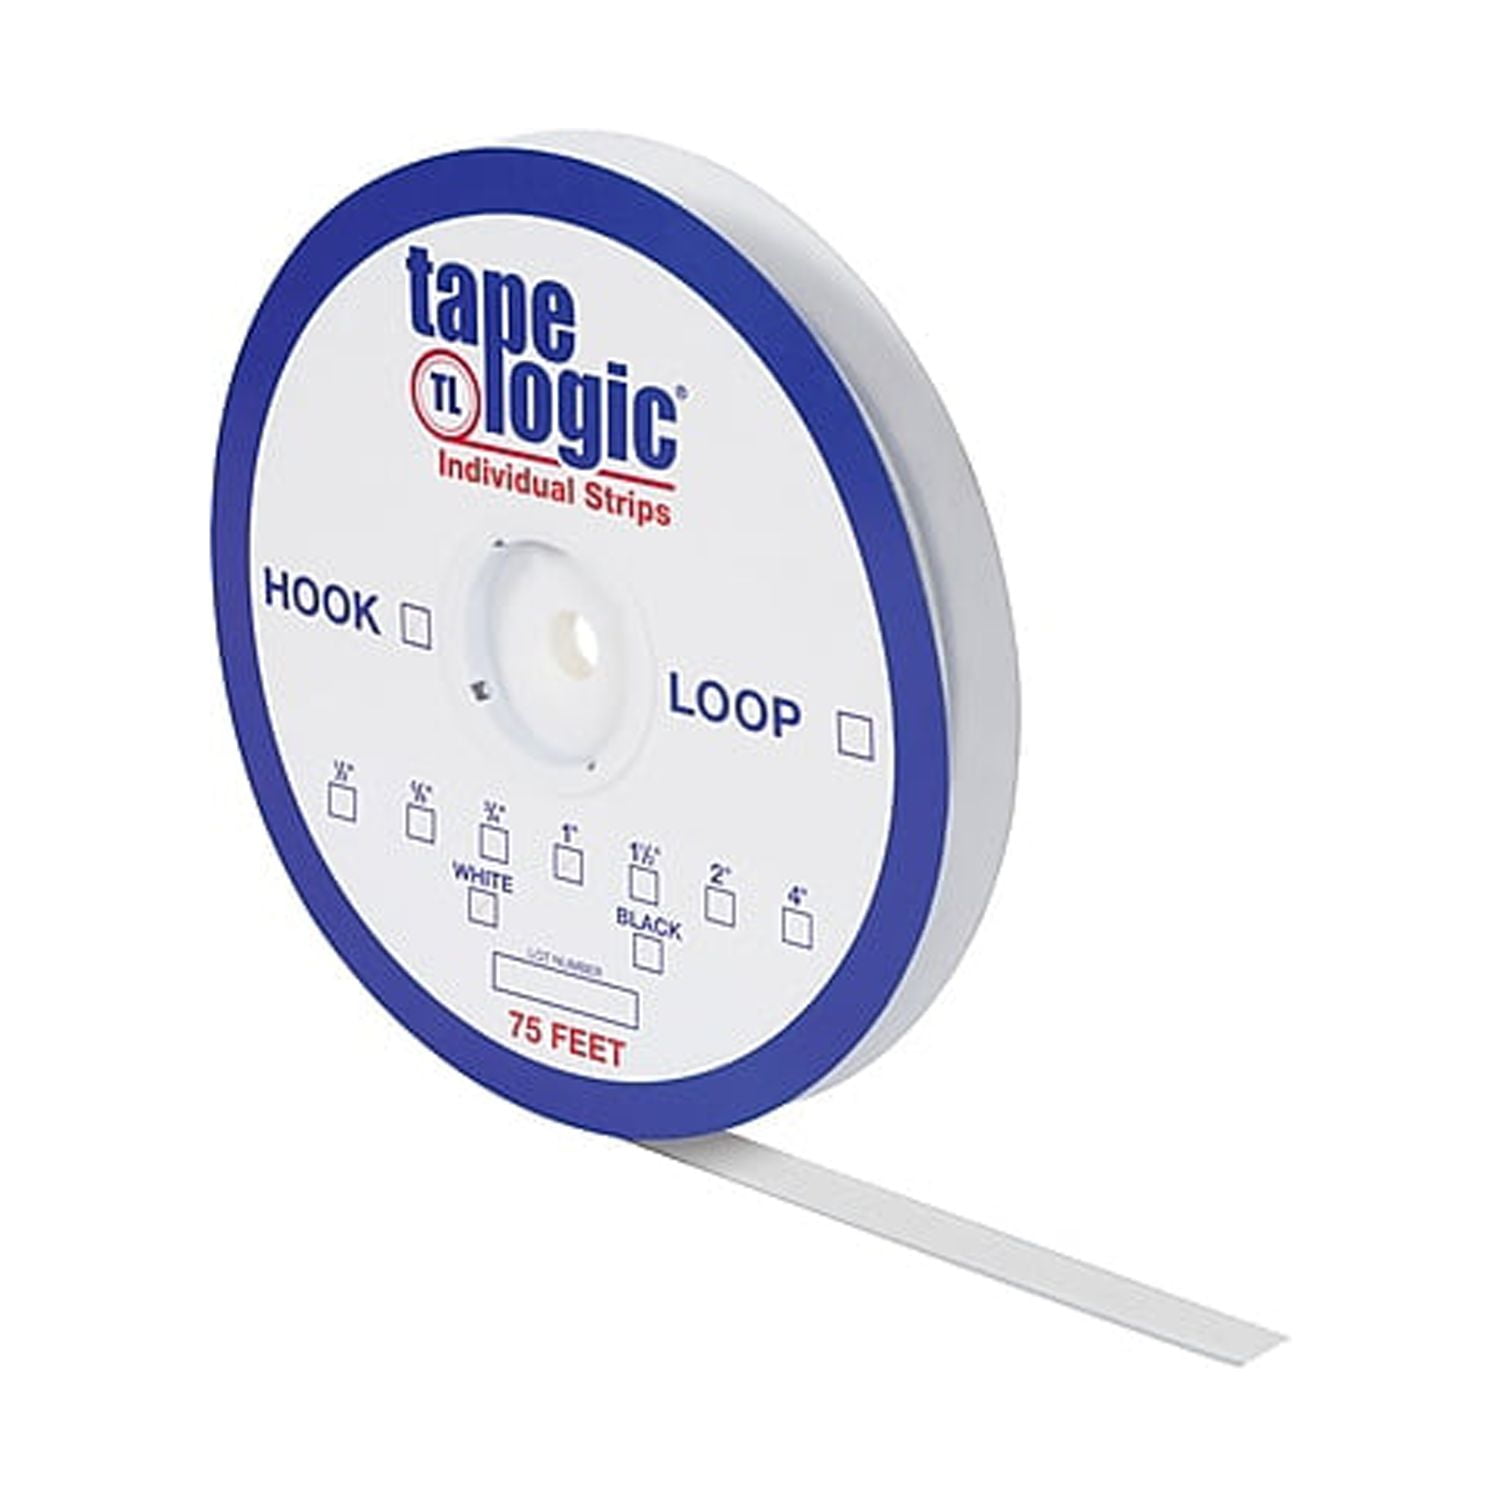 Picture of Tape Logic HLT115 1 in. x 75 ft. White Hook Individual Tape Strips